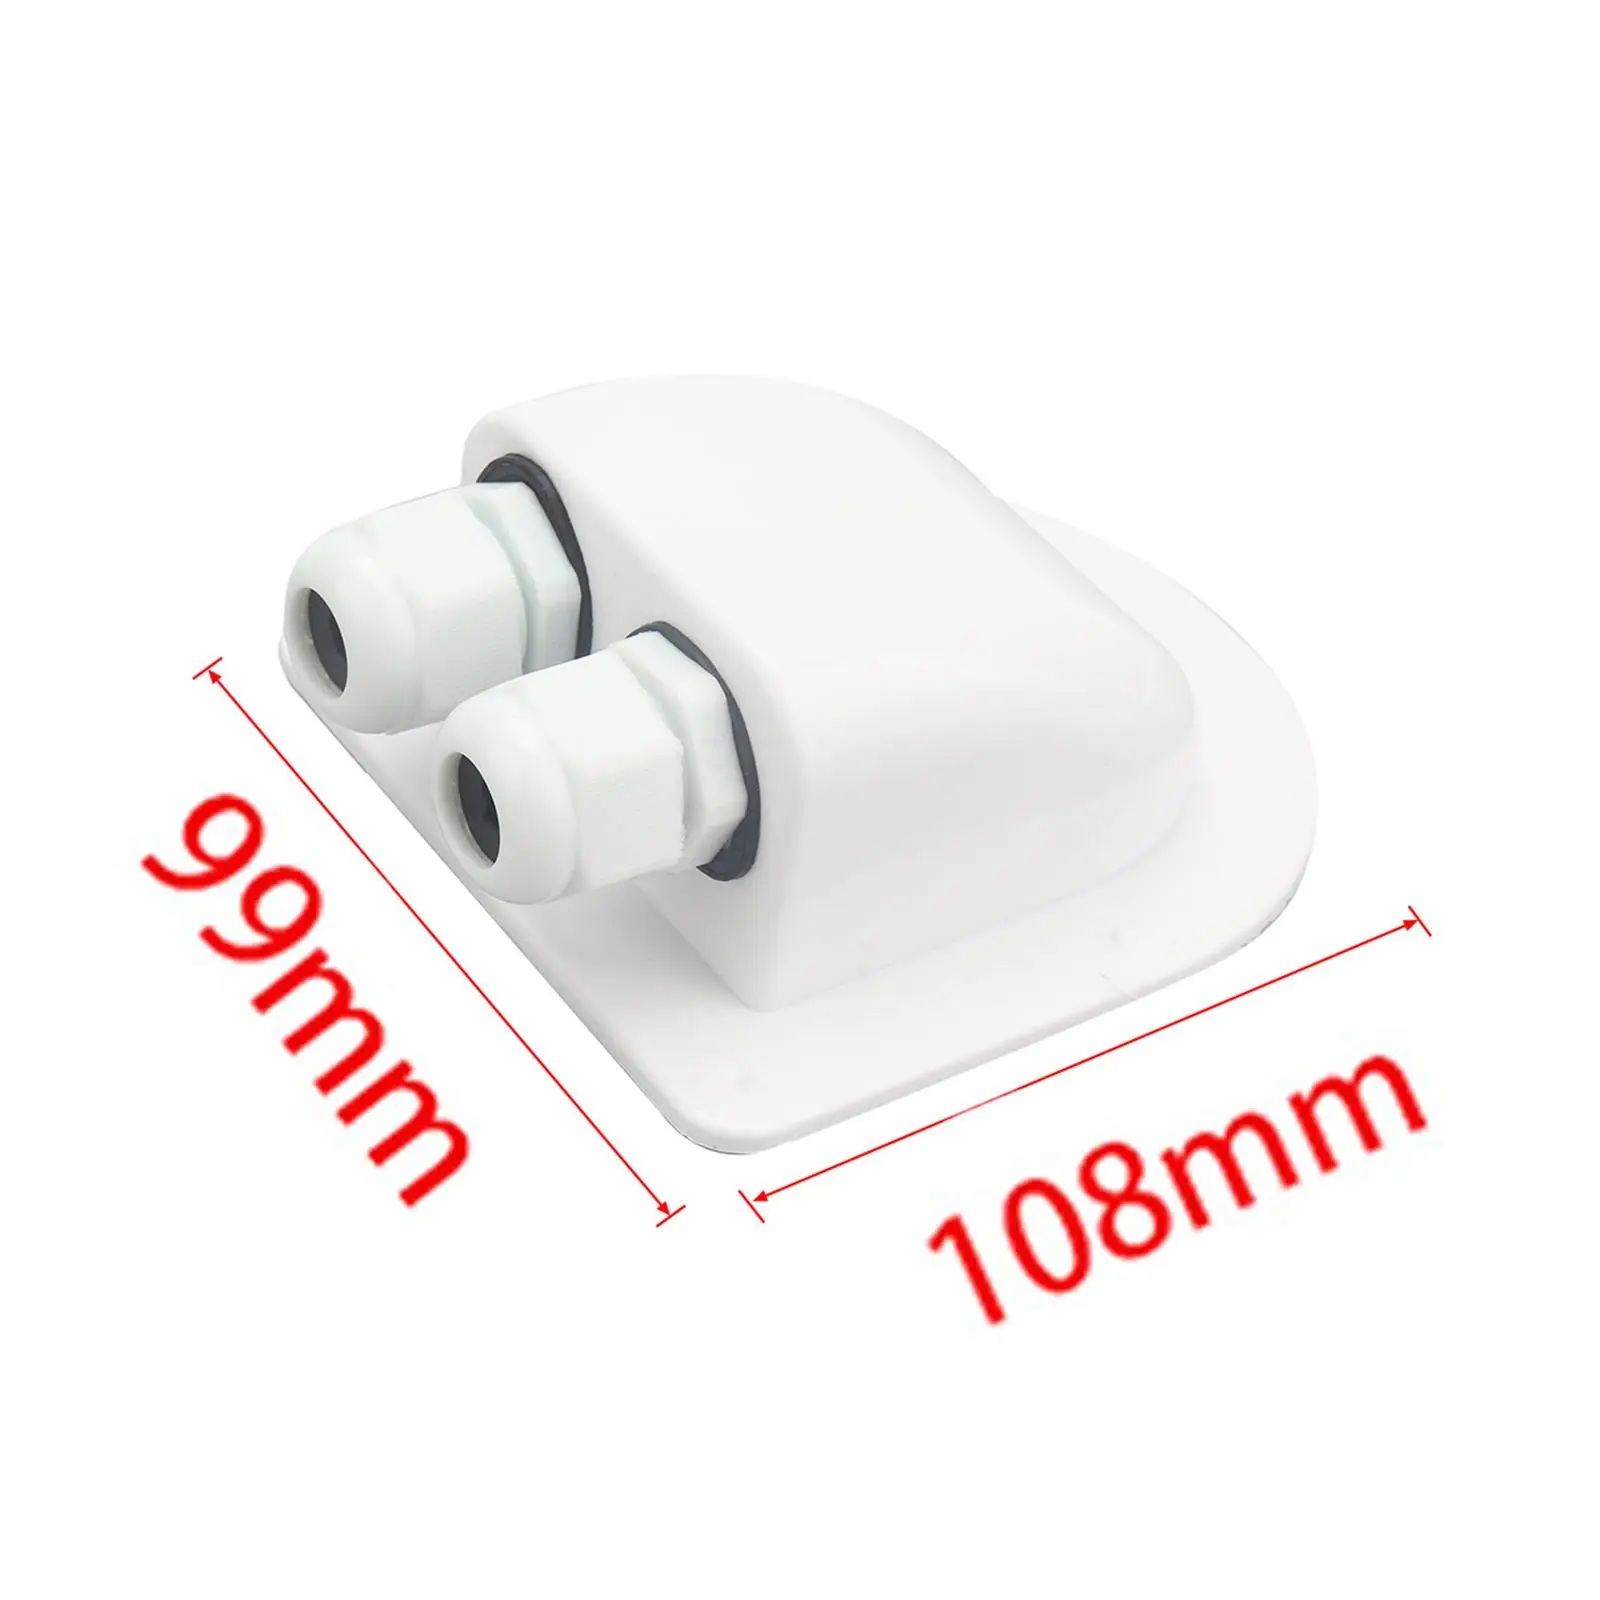 Solar Cable Entry Gland Waterproof for RV Caravan, Boat, Marine Professional Simple to Install Quality Material Accessory